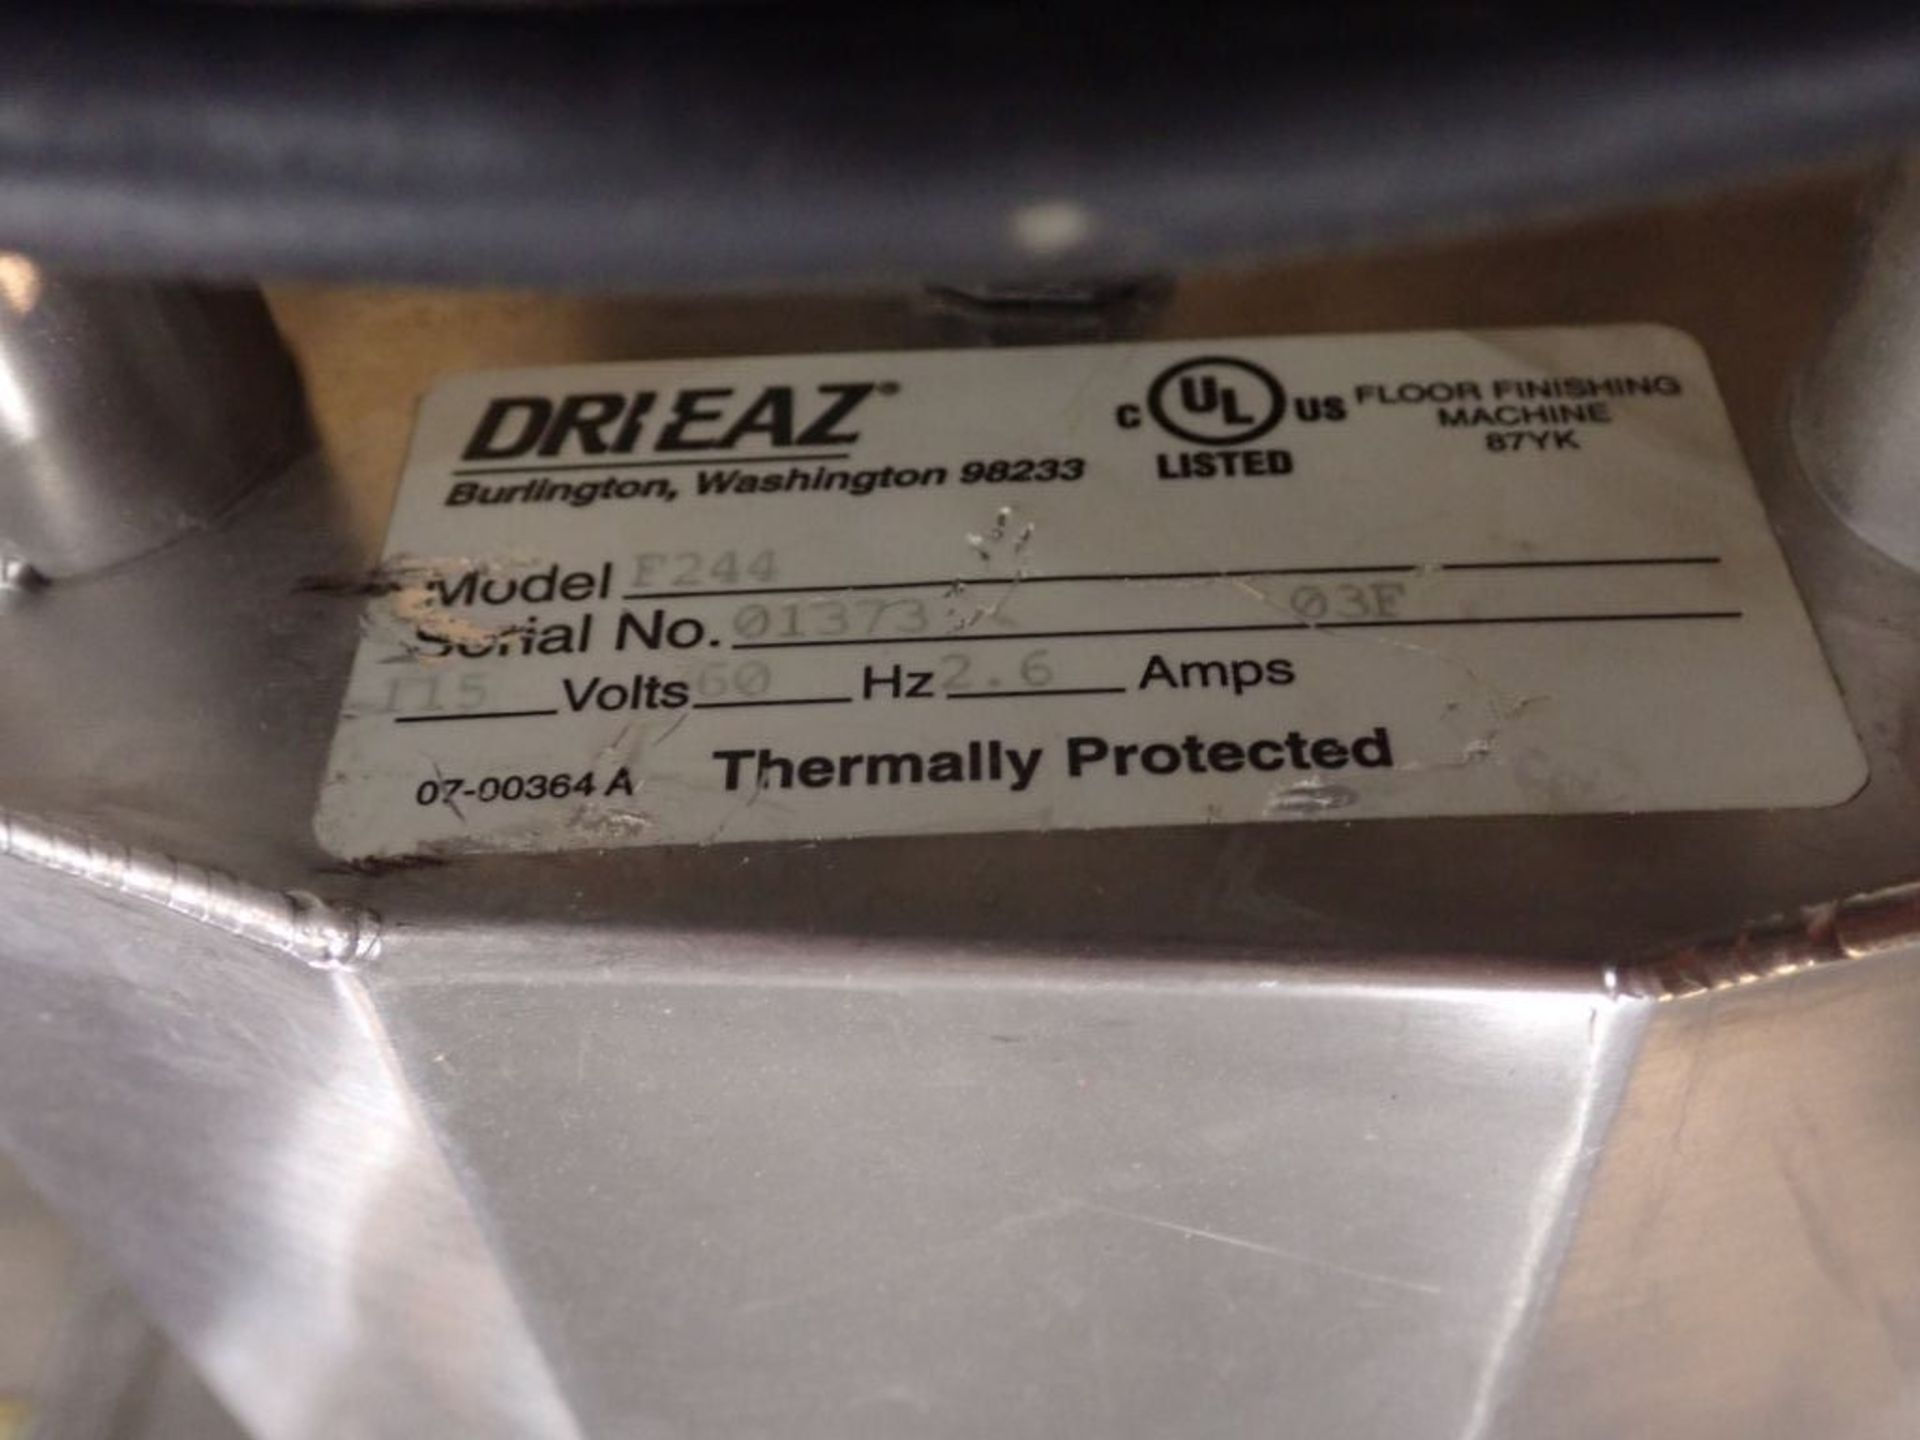 Lot of (2) Drieaze Flood Pro Flood Extractors - Image 12 of 12